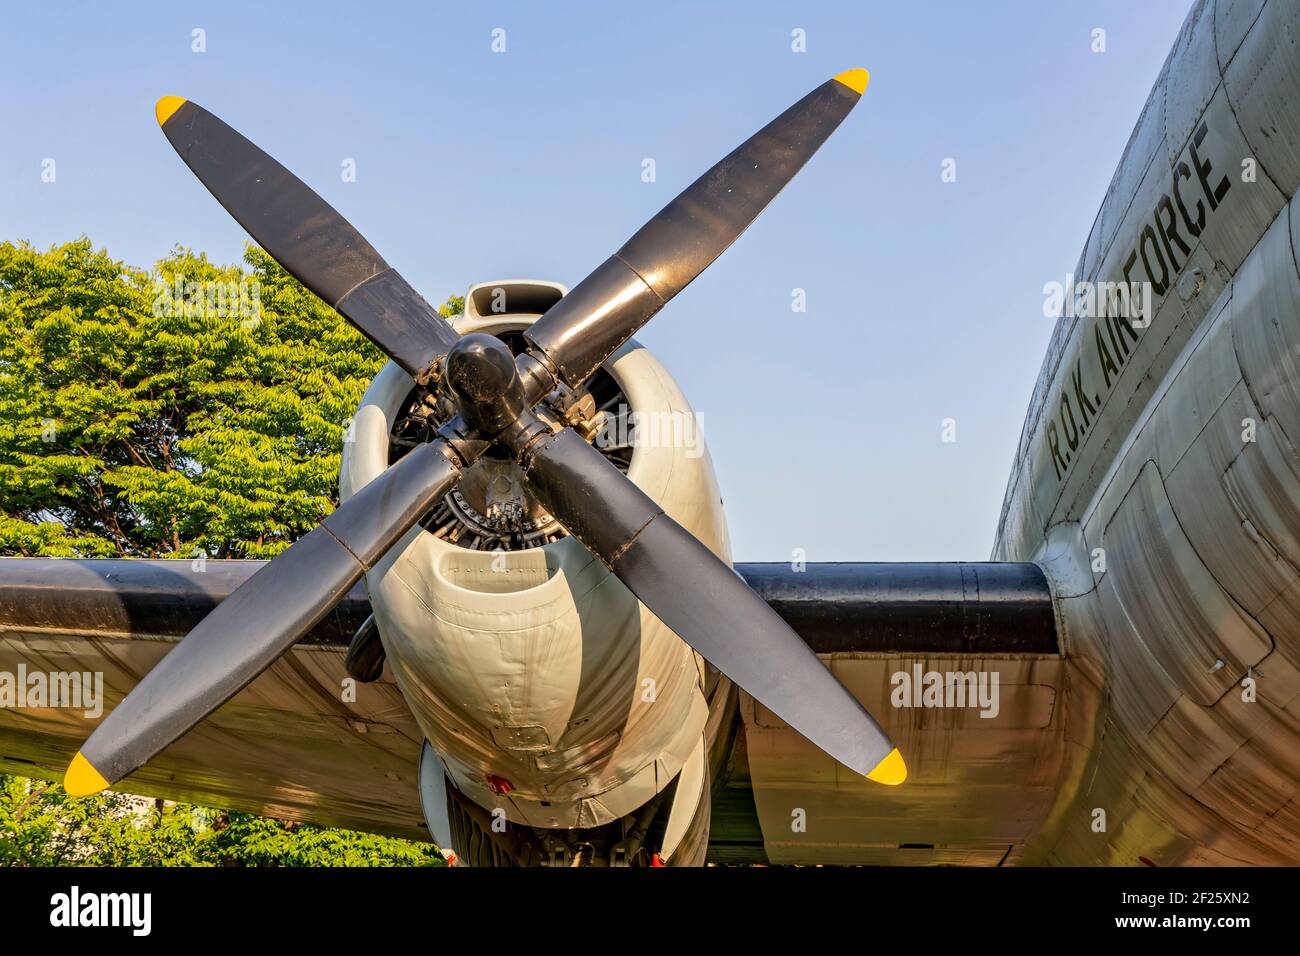 Seoul, South Korea. 27th May, 2017. Curtiss C-46 Commando Transport on display at the War Memorial of Korea Museum. Stock Photo